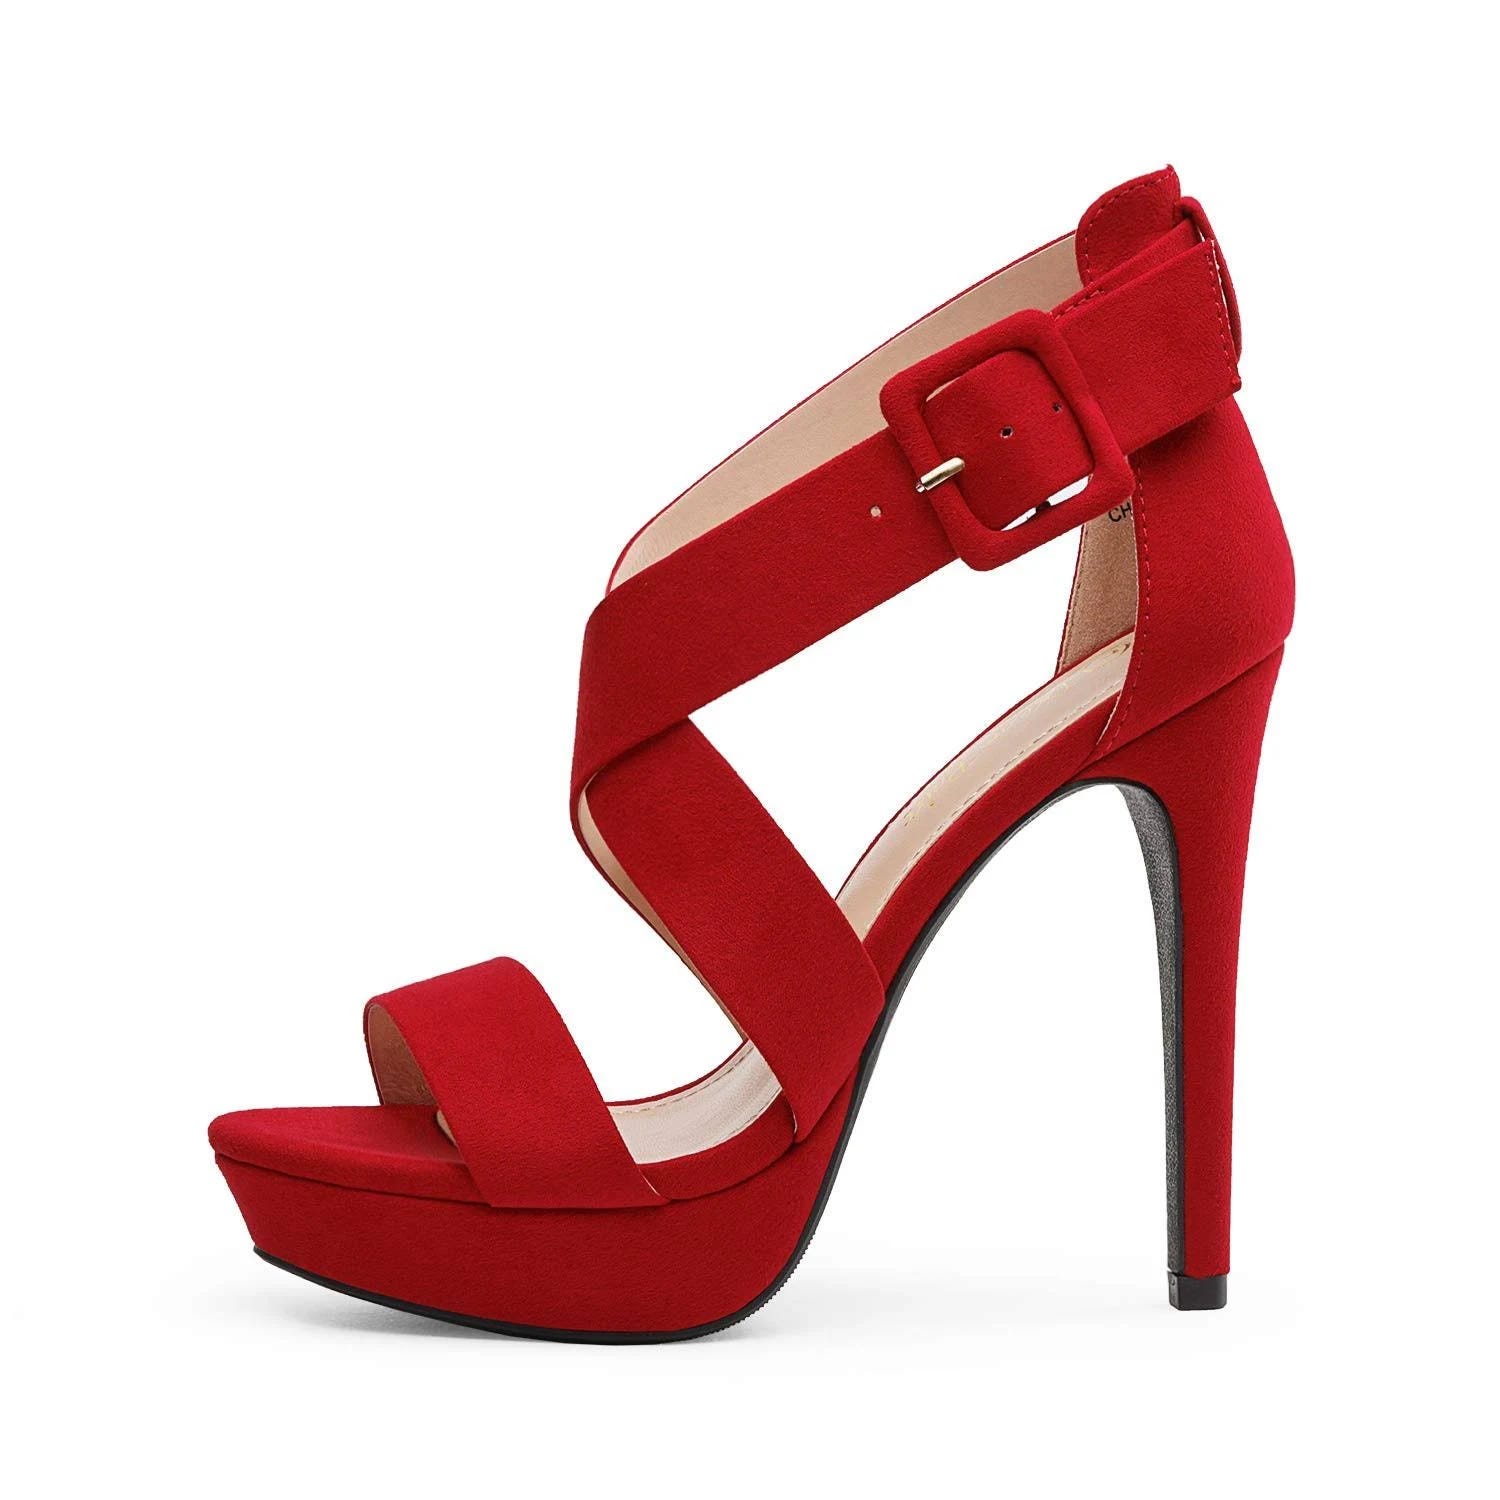 Stylish Crossed Strap Red High Heels with Adjustable Buckle | Image